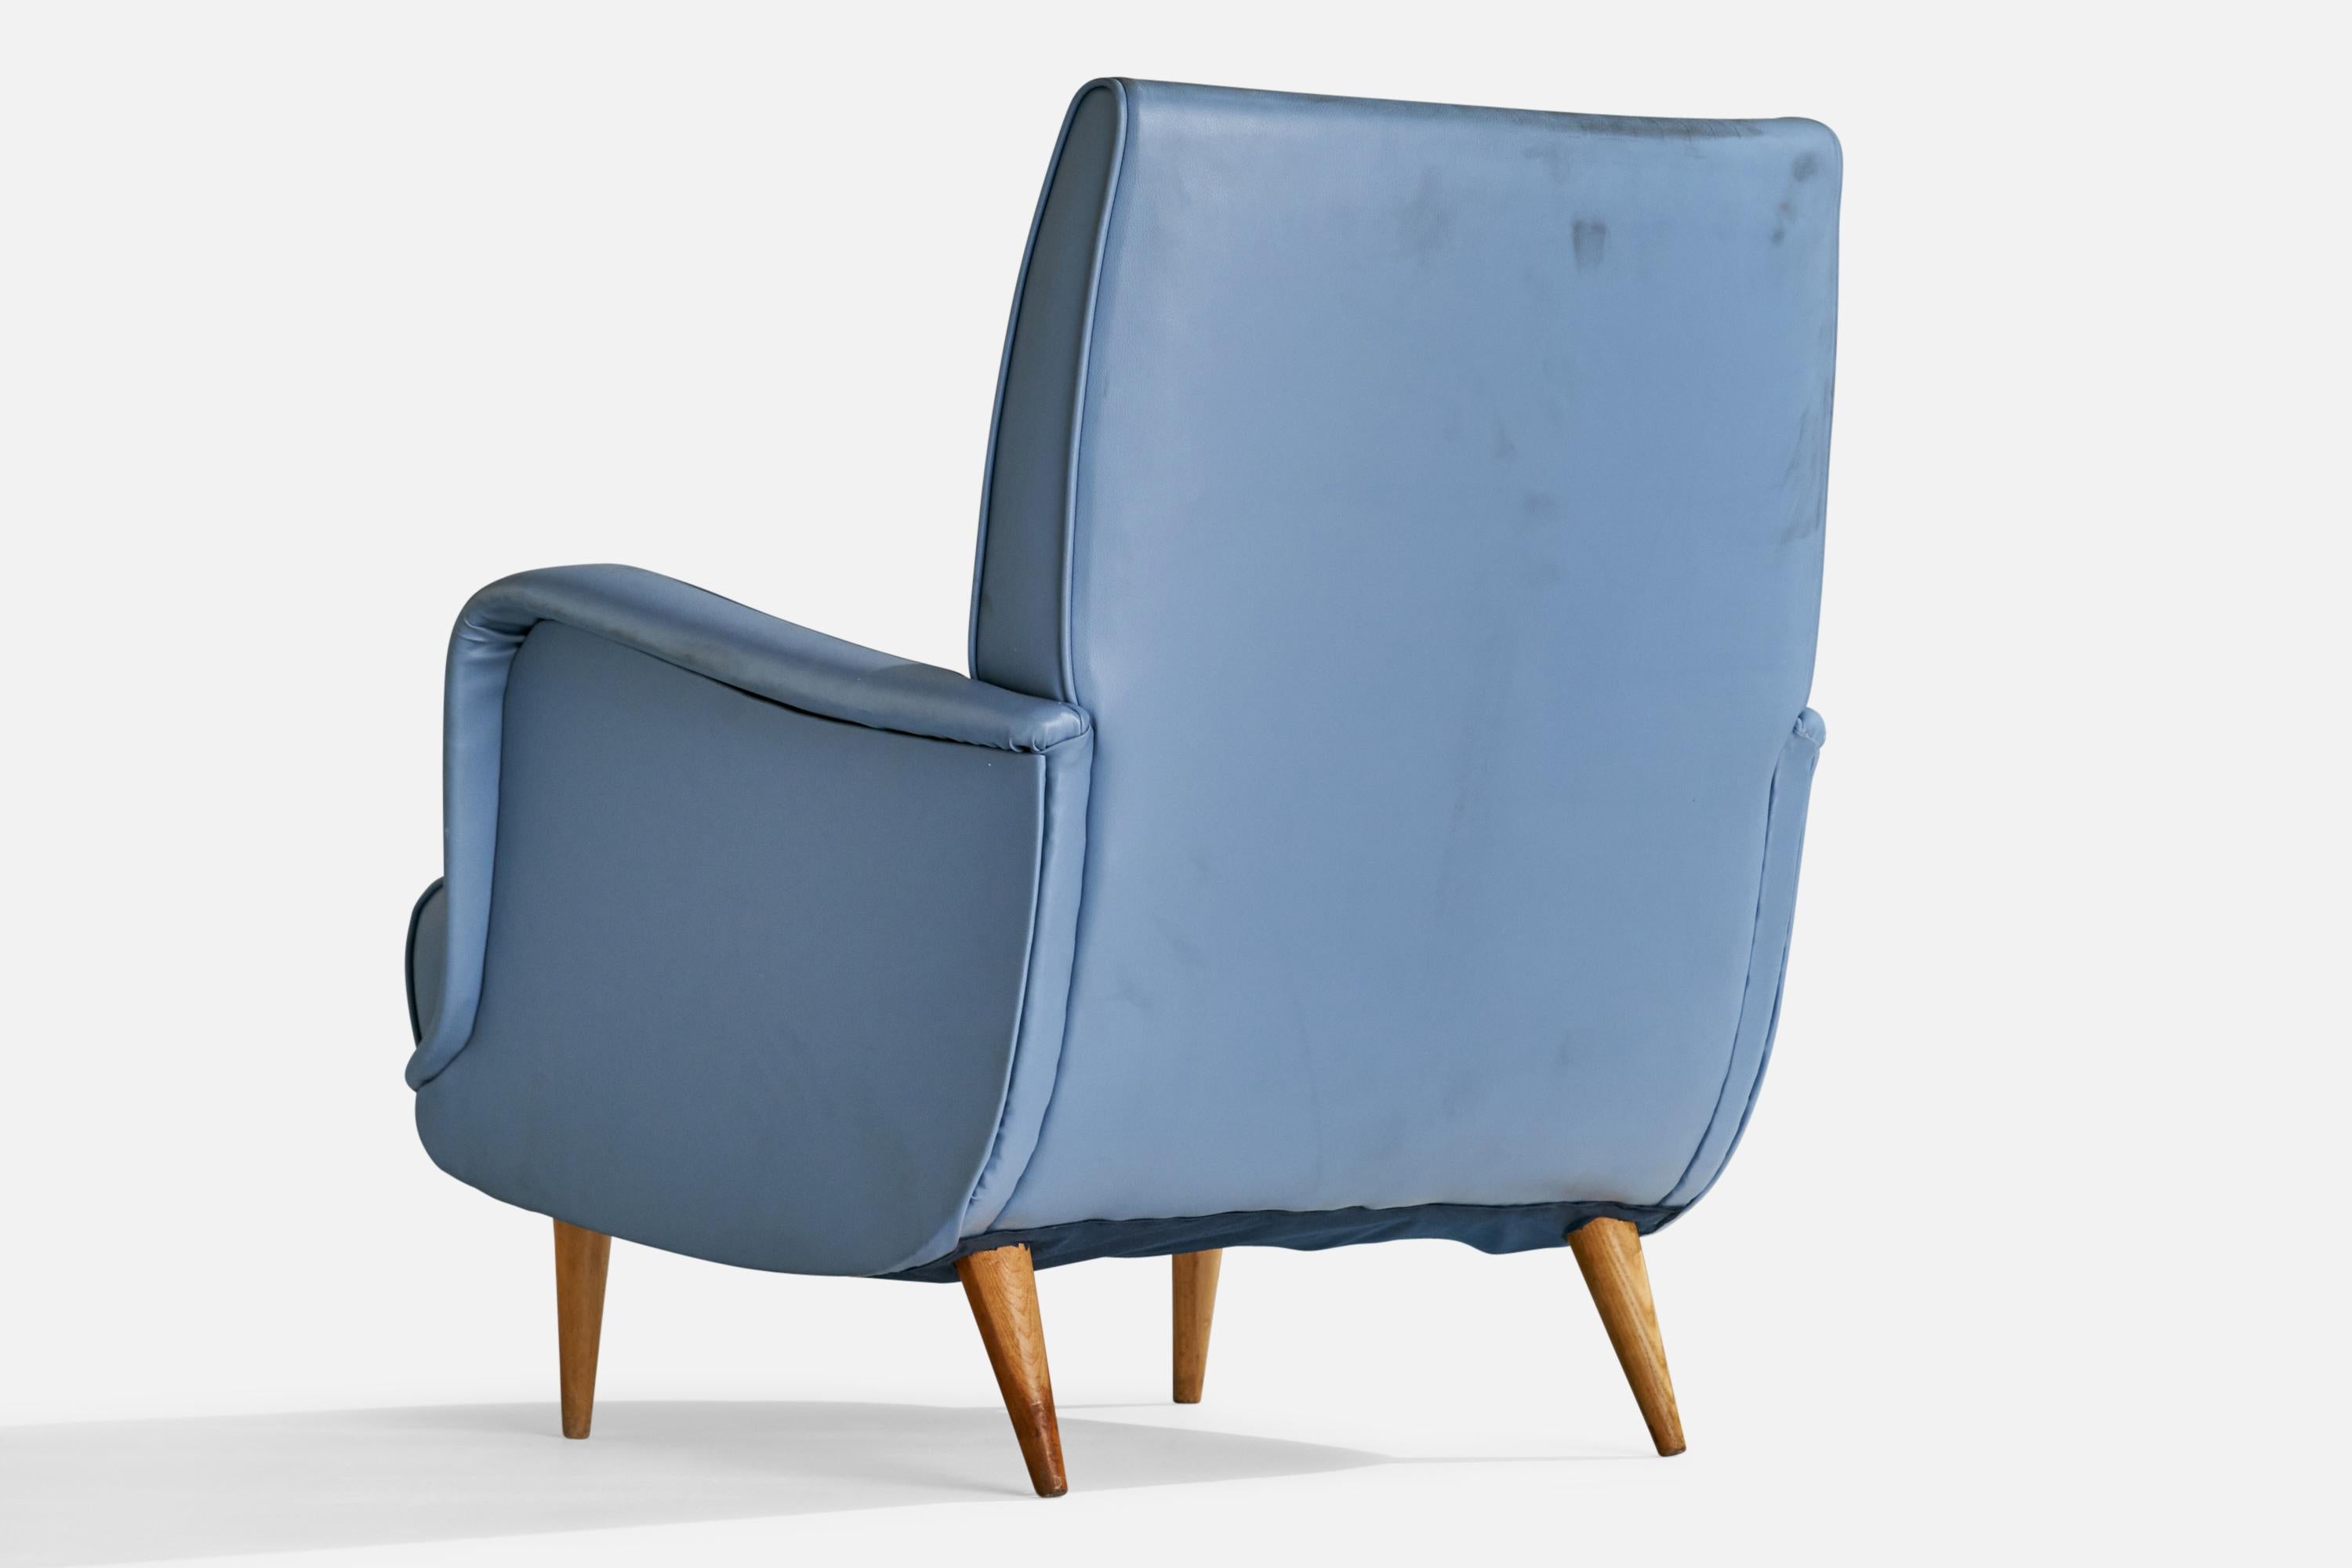 Carlo De Carli, Lounge Chairs, Vinyl, Wood, Italy, 1960s For Sale 5